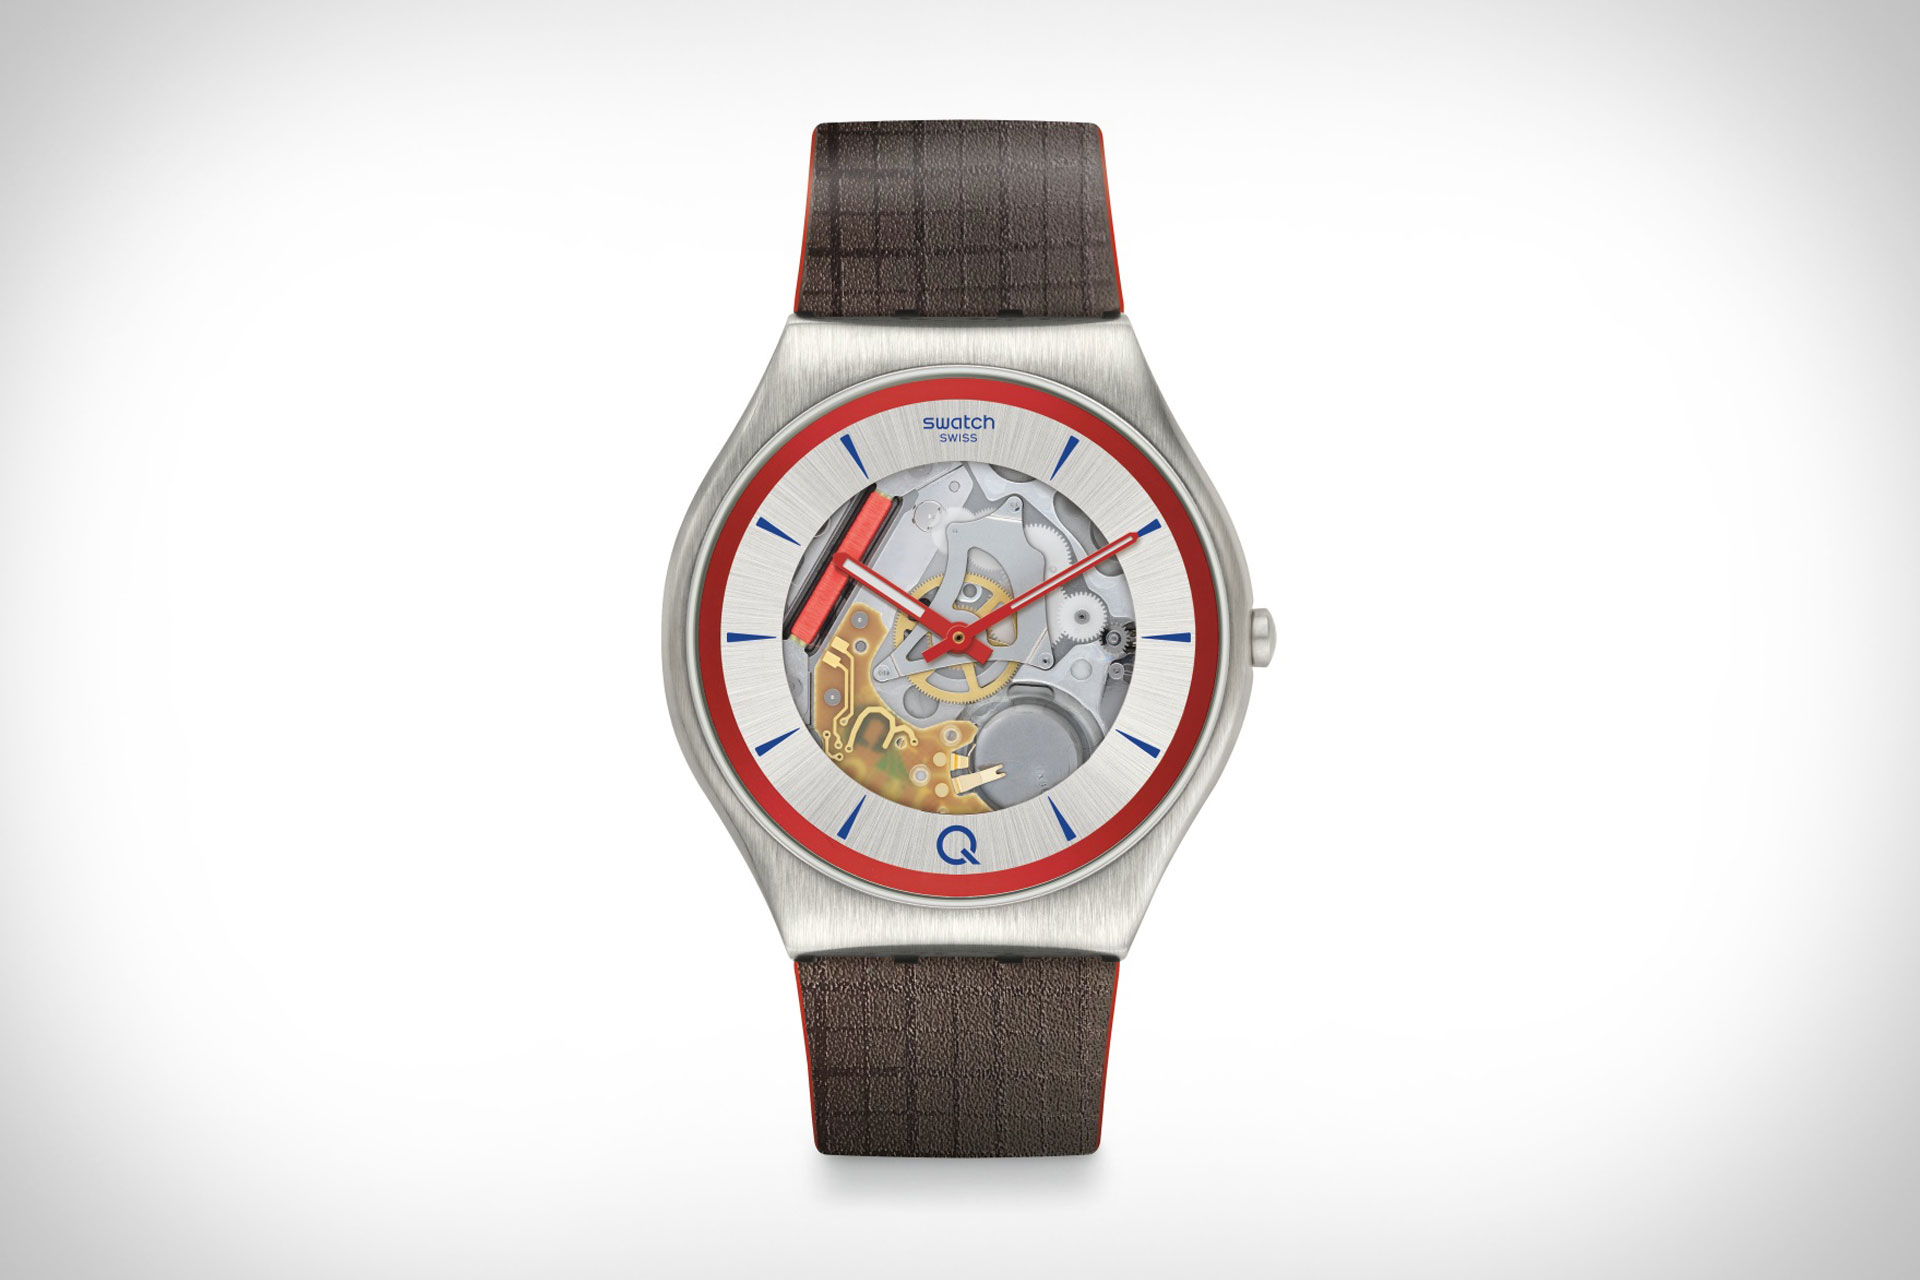 Swatch x 007 Q Watch | Uncrate